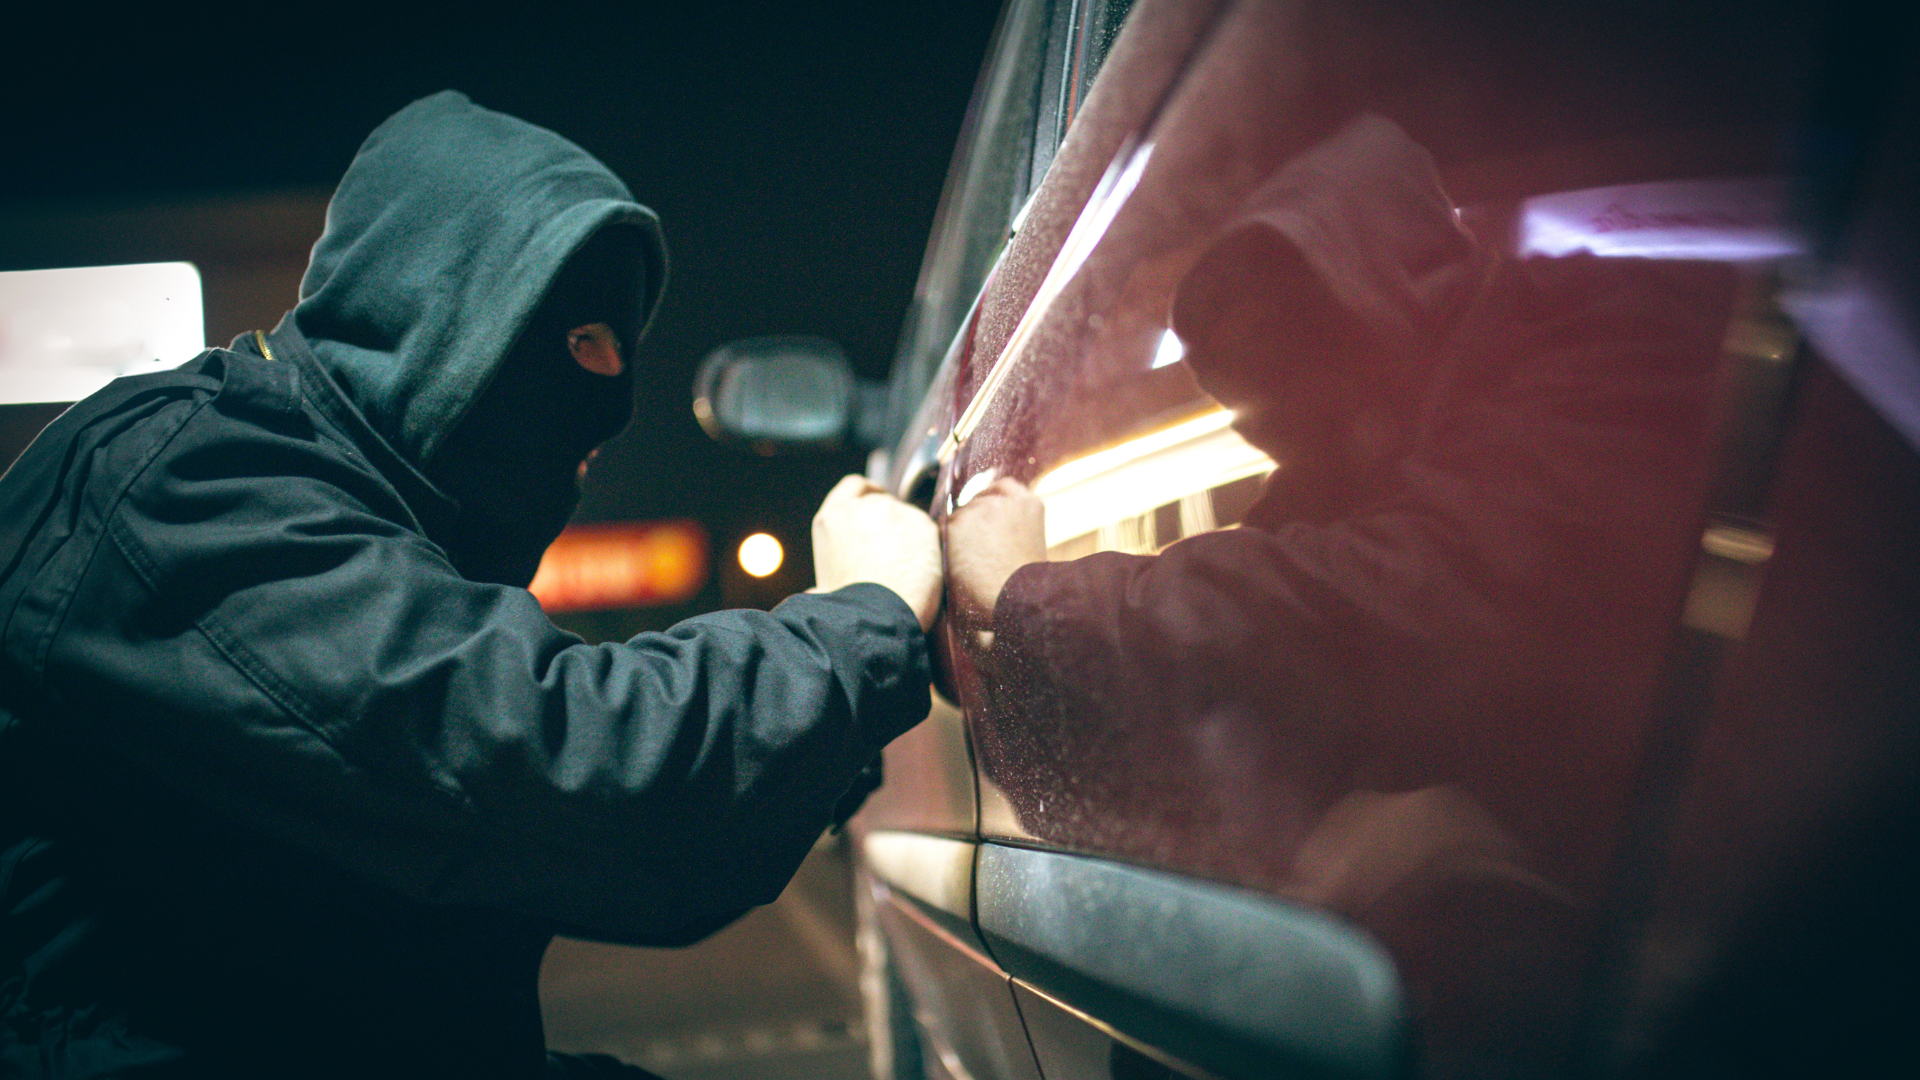 GPS Tracking For Auto Theft. A third party GPS tracker greatly increases the chances of recovering your vehicle if it is stolen.